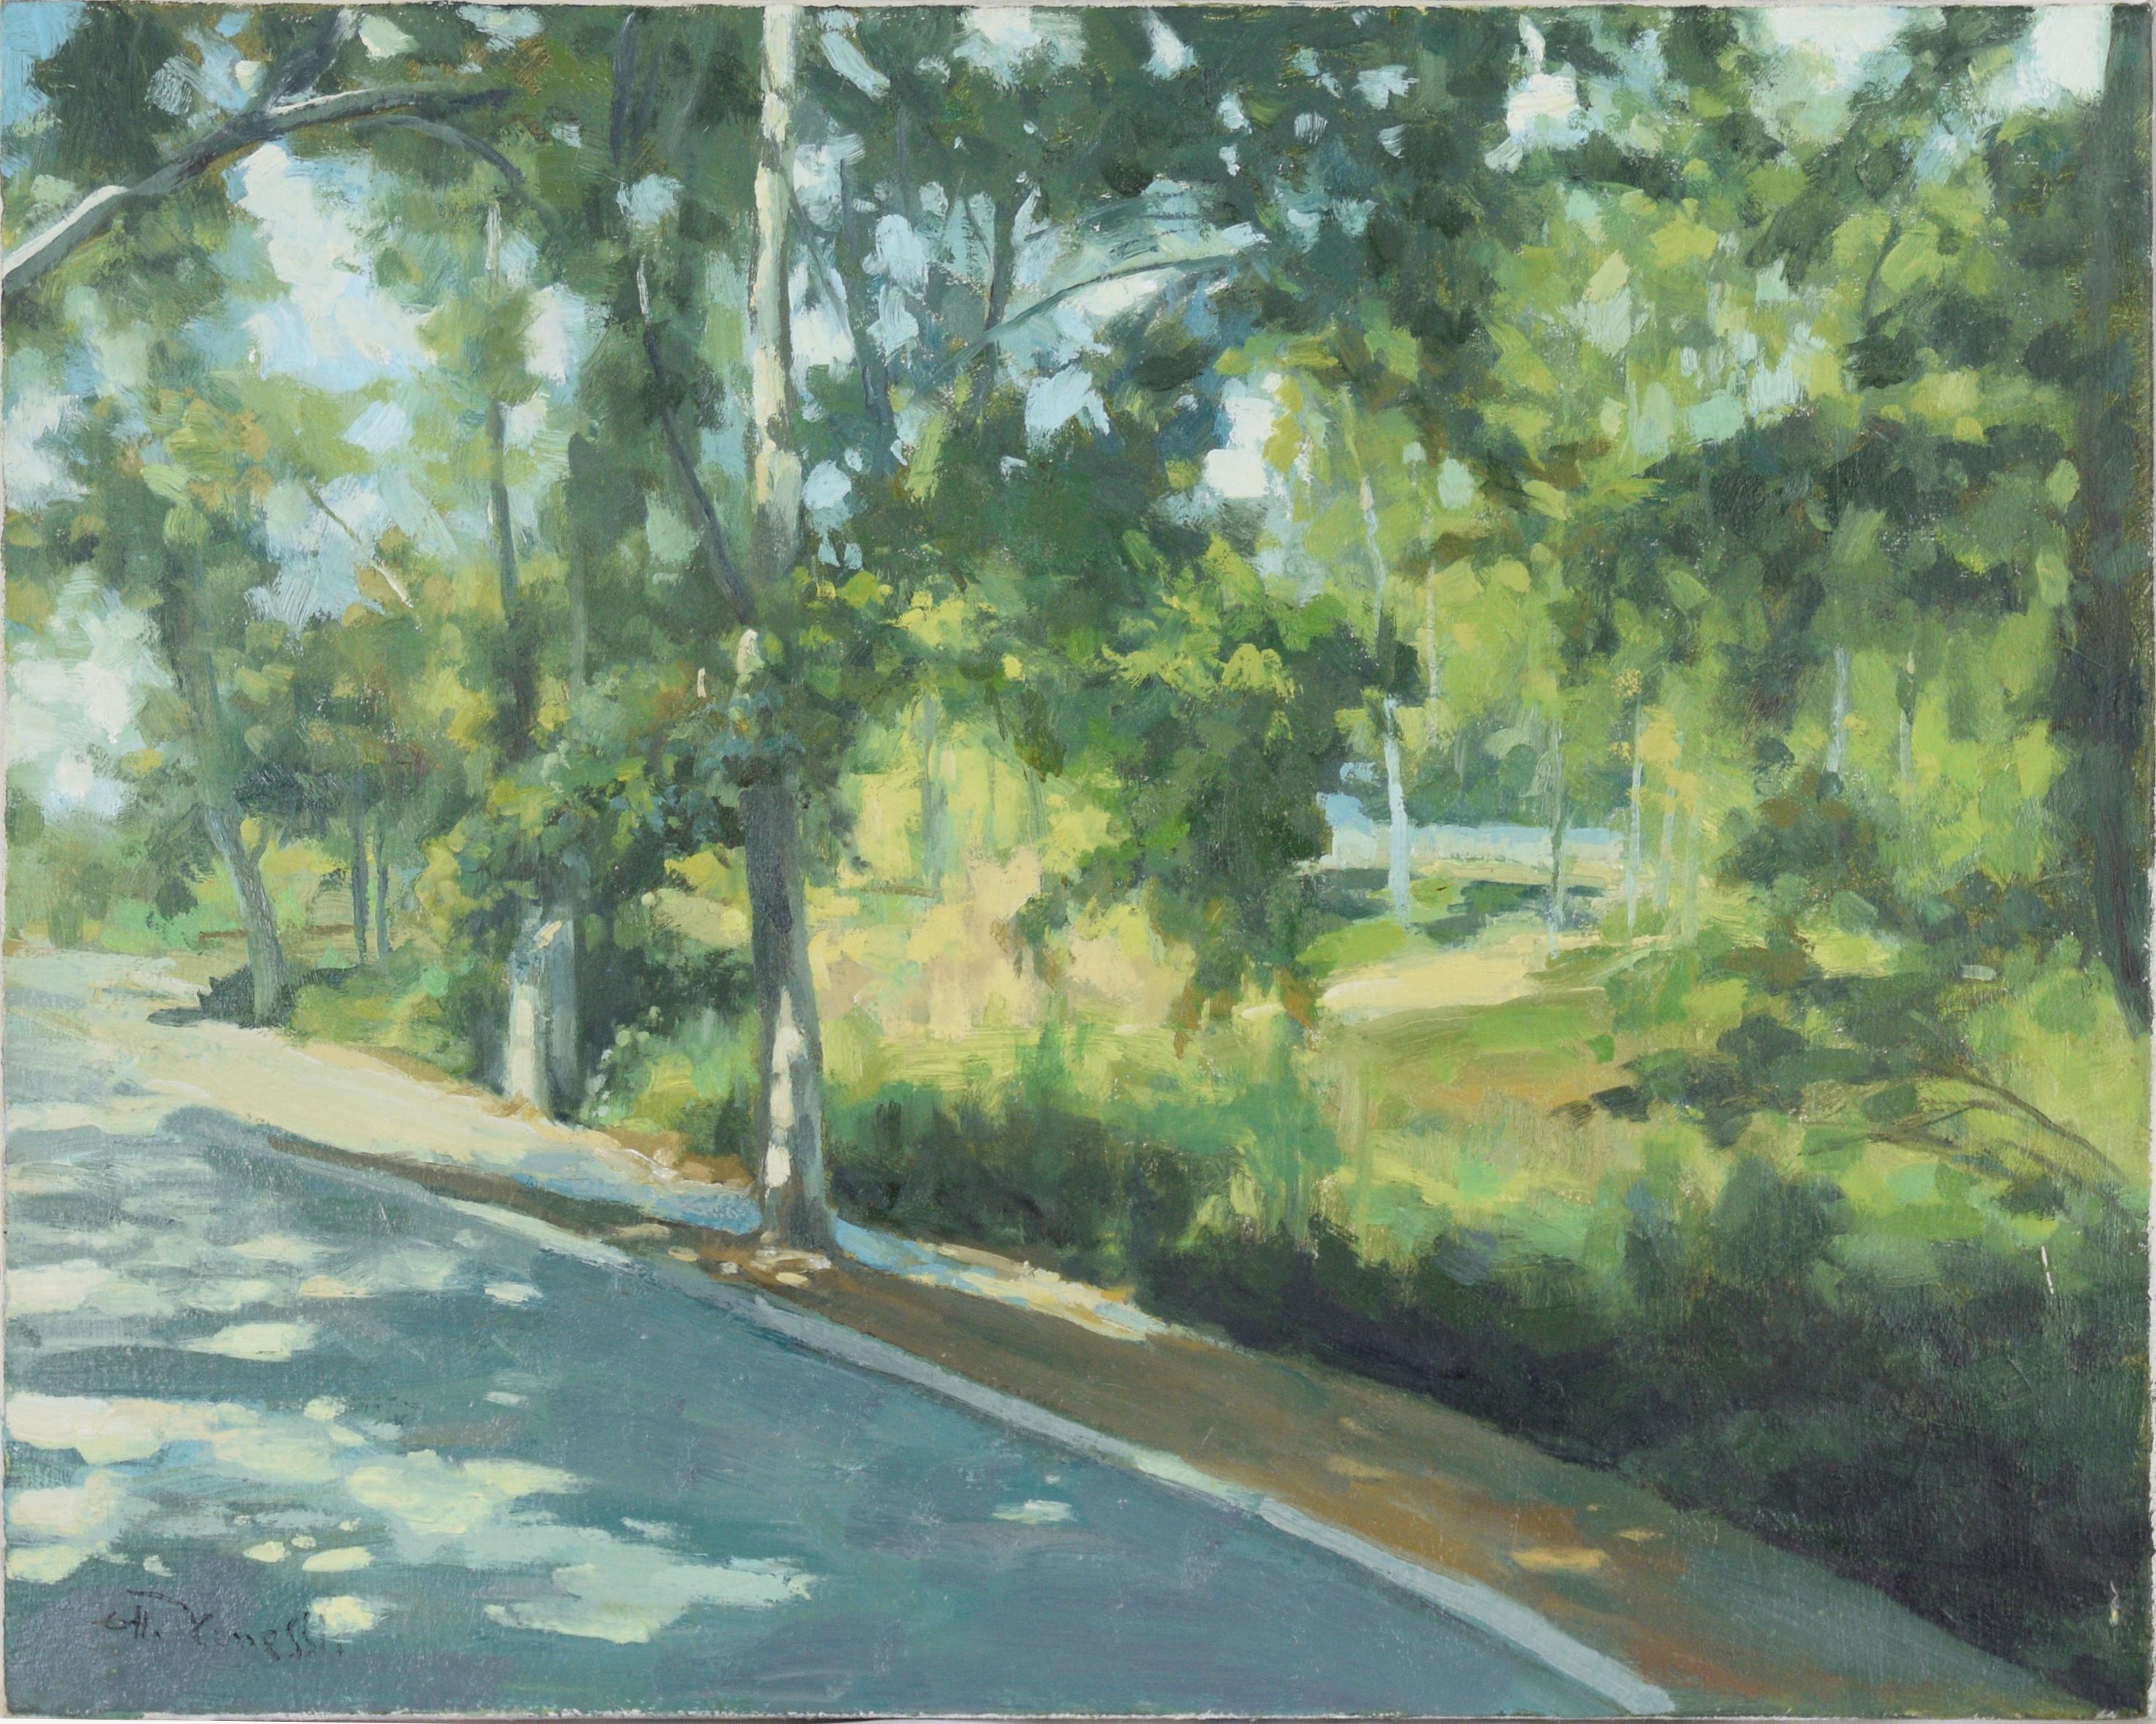 Gholam Yunessi Landscape Painting - Sidewalk Along the Park - Landscape in Oil on Canvas